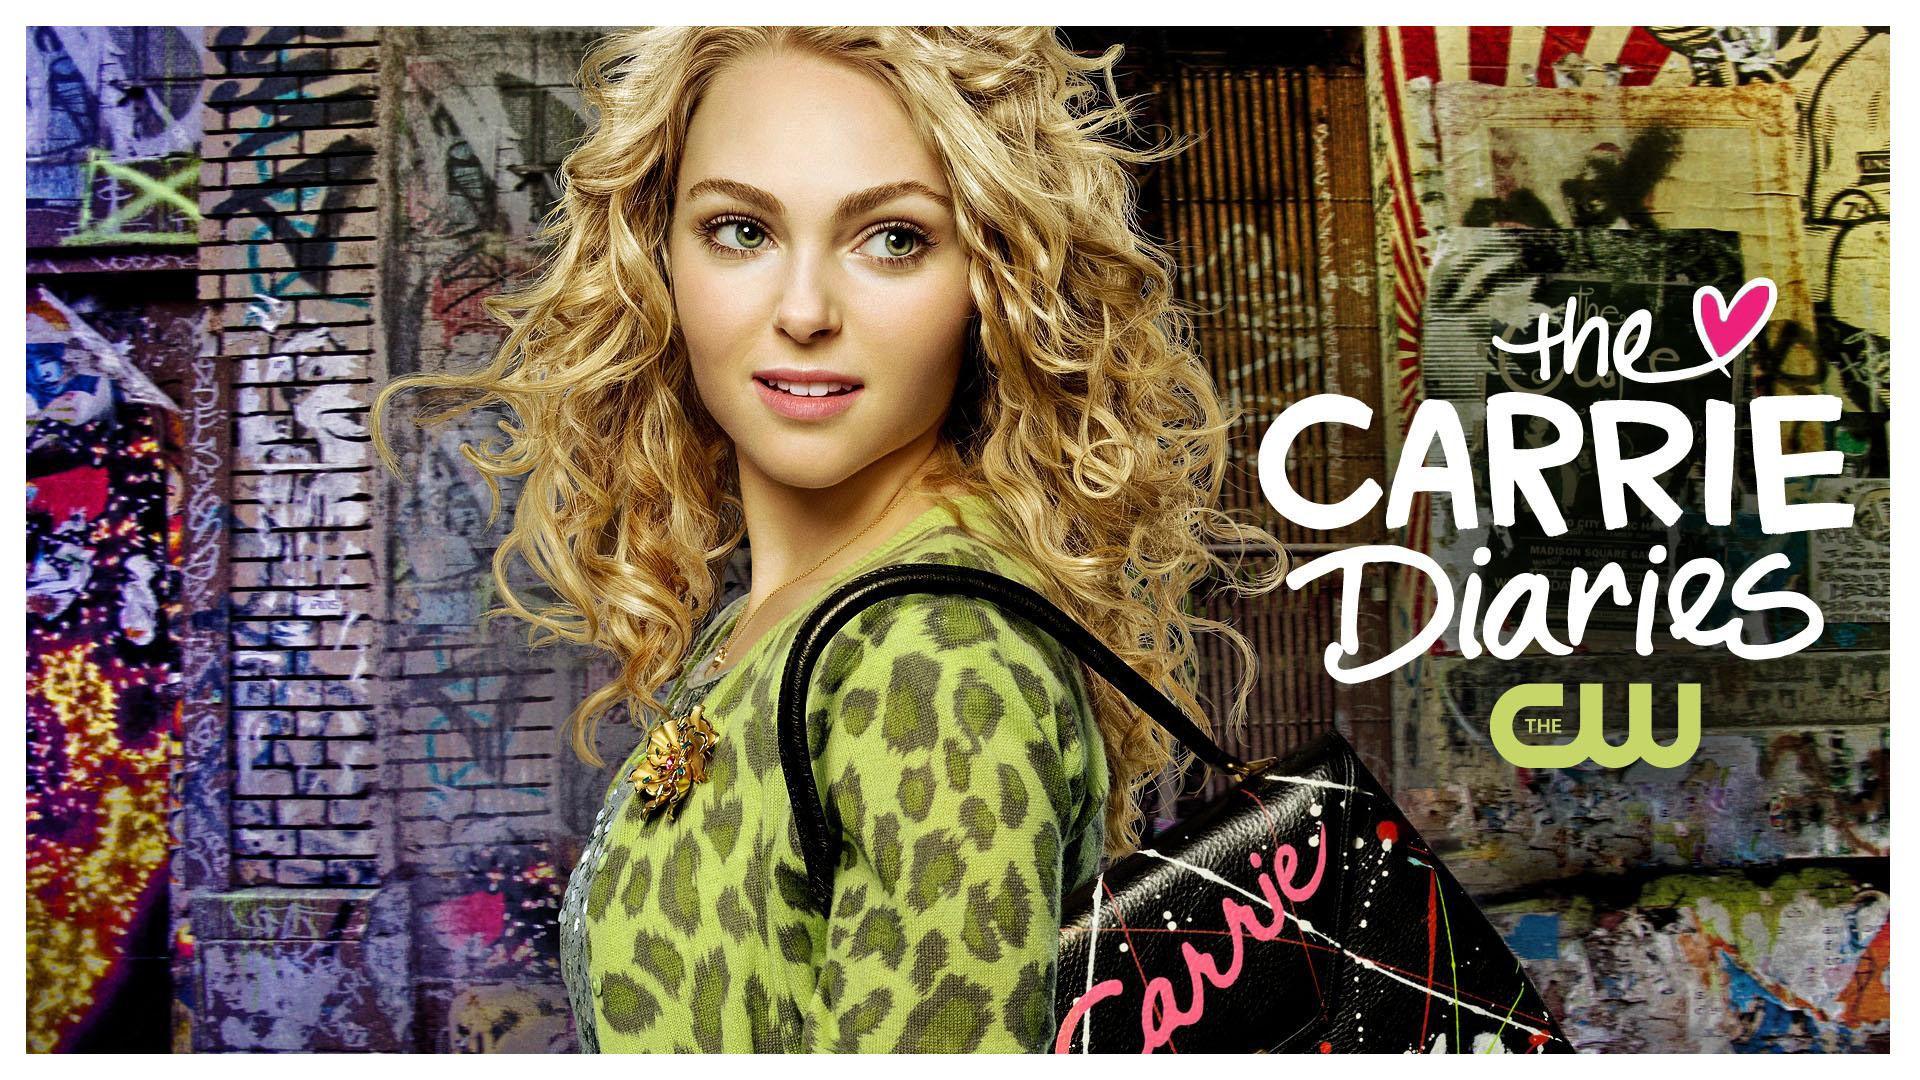 The Carrie Diaries wallpaper, TV Show, HQ The Carrie Diaries